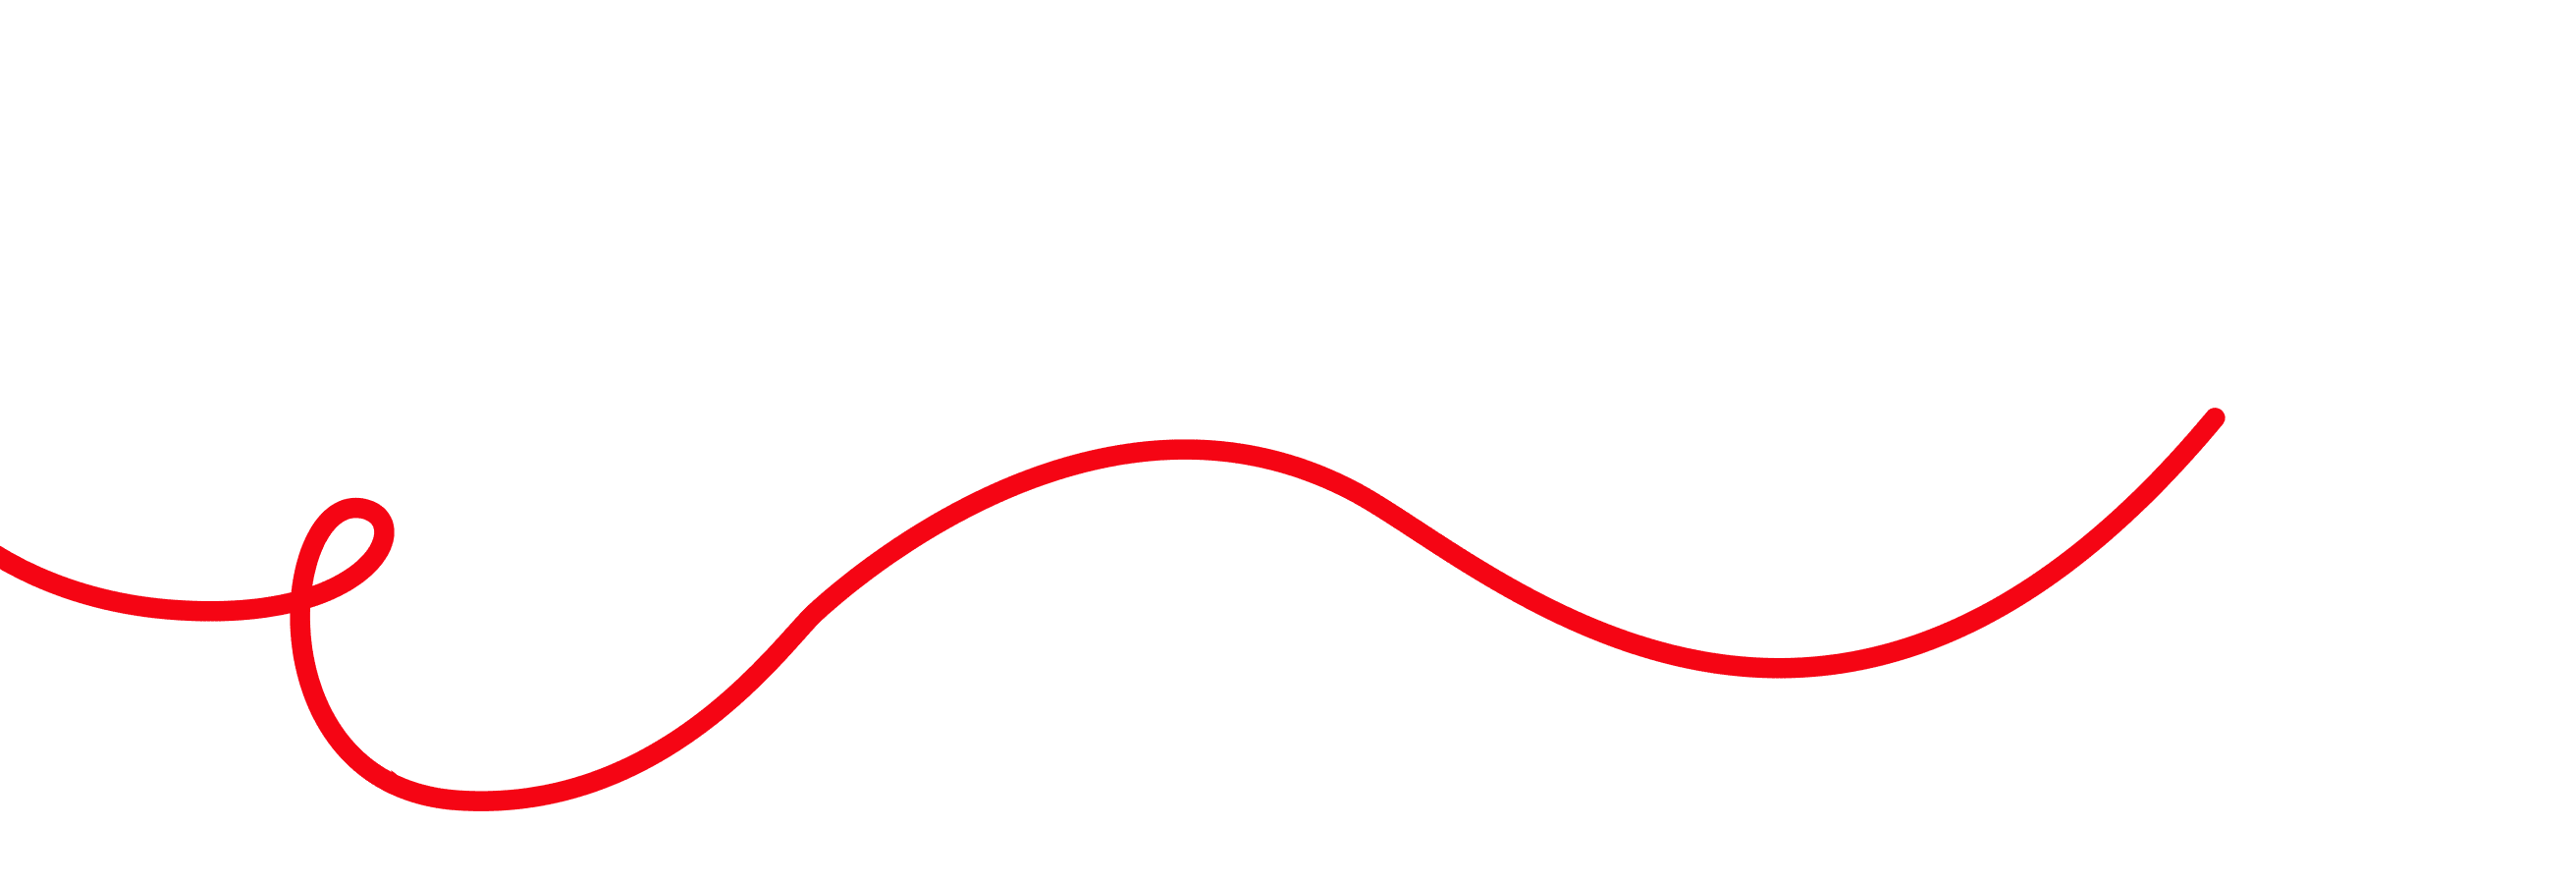 Red Line PNG HD Image